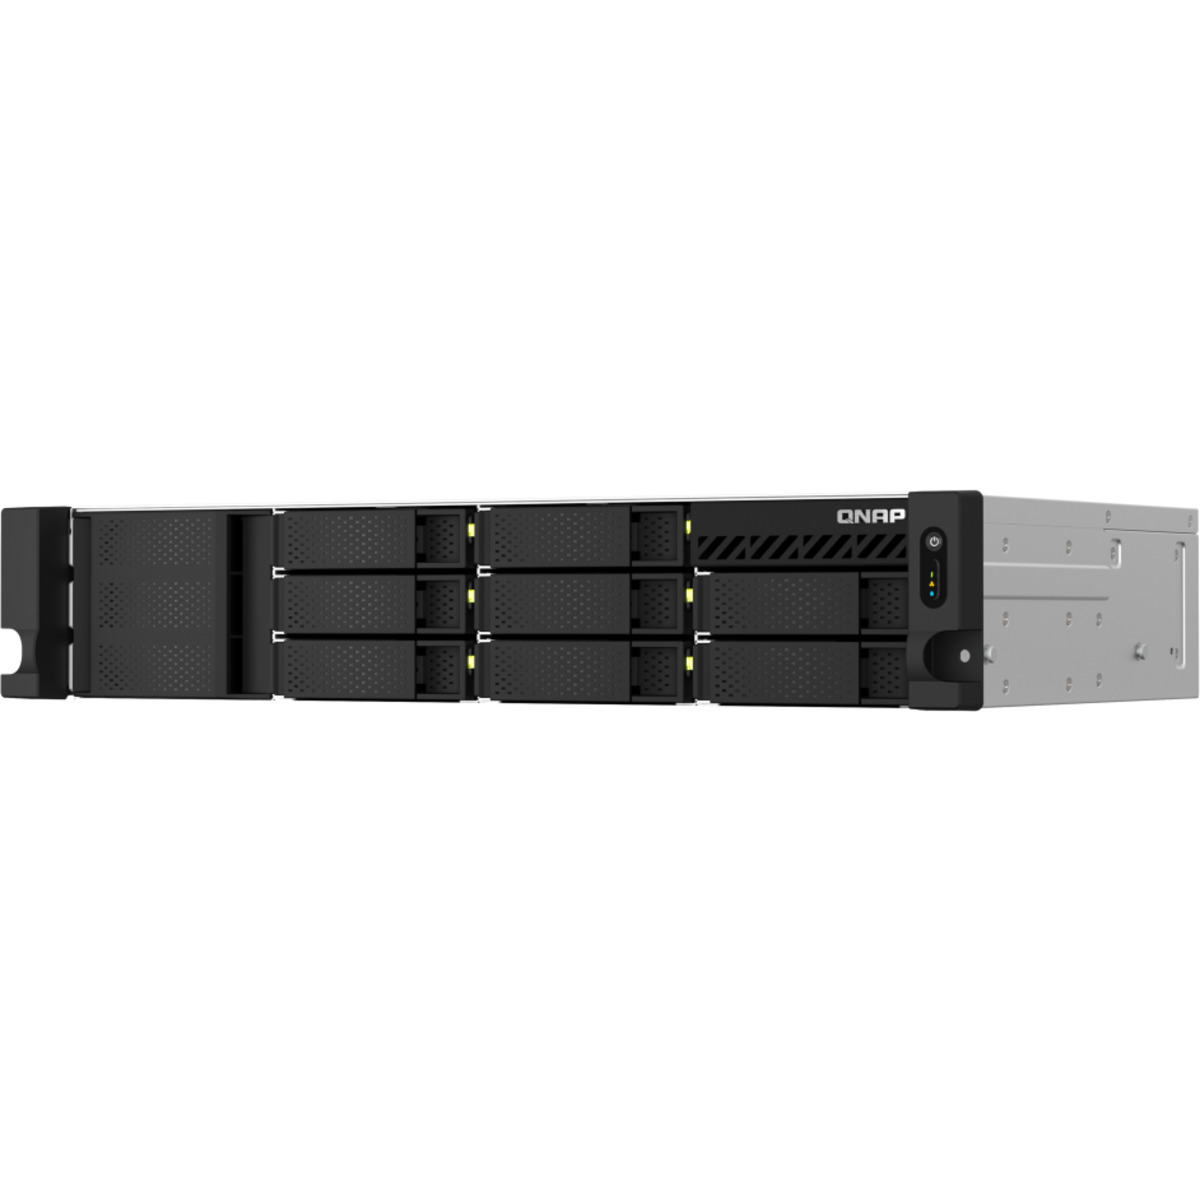 QNAP TS-864eU-RP 14tb 8-Bay RackMount Multimedia / Power User / Business NAS - Network Attached Storage Device 7x2tb Western Digital Gold WD2005FBYZ 3.5 7200rpm SATA 6Gb/s HDD ENTERPRISE Class Drives Installed - Burn-In Tested TS-864eU-RP